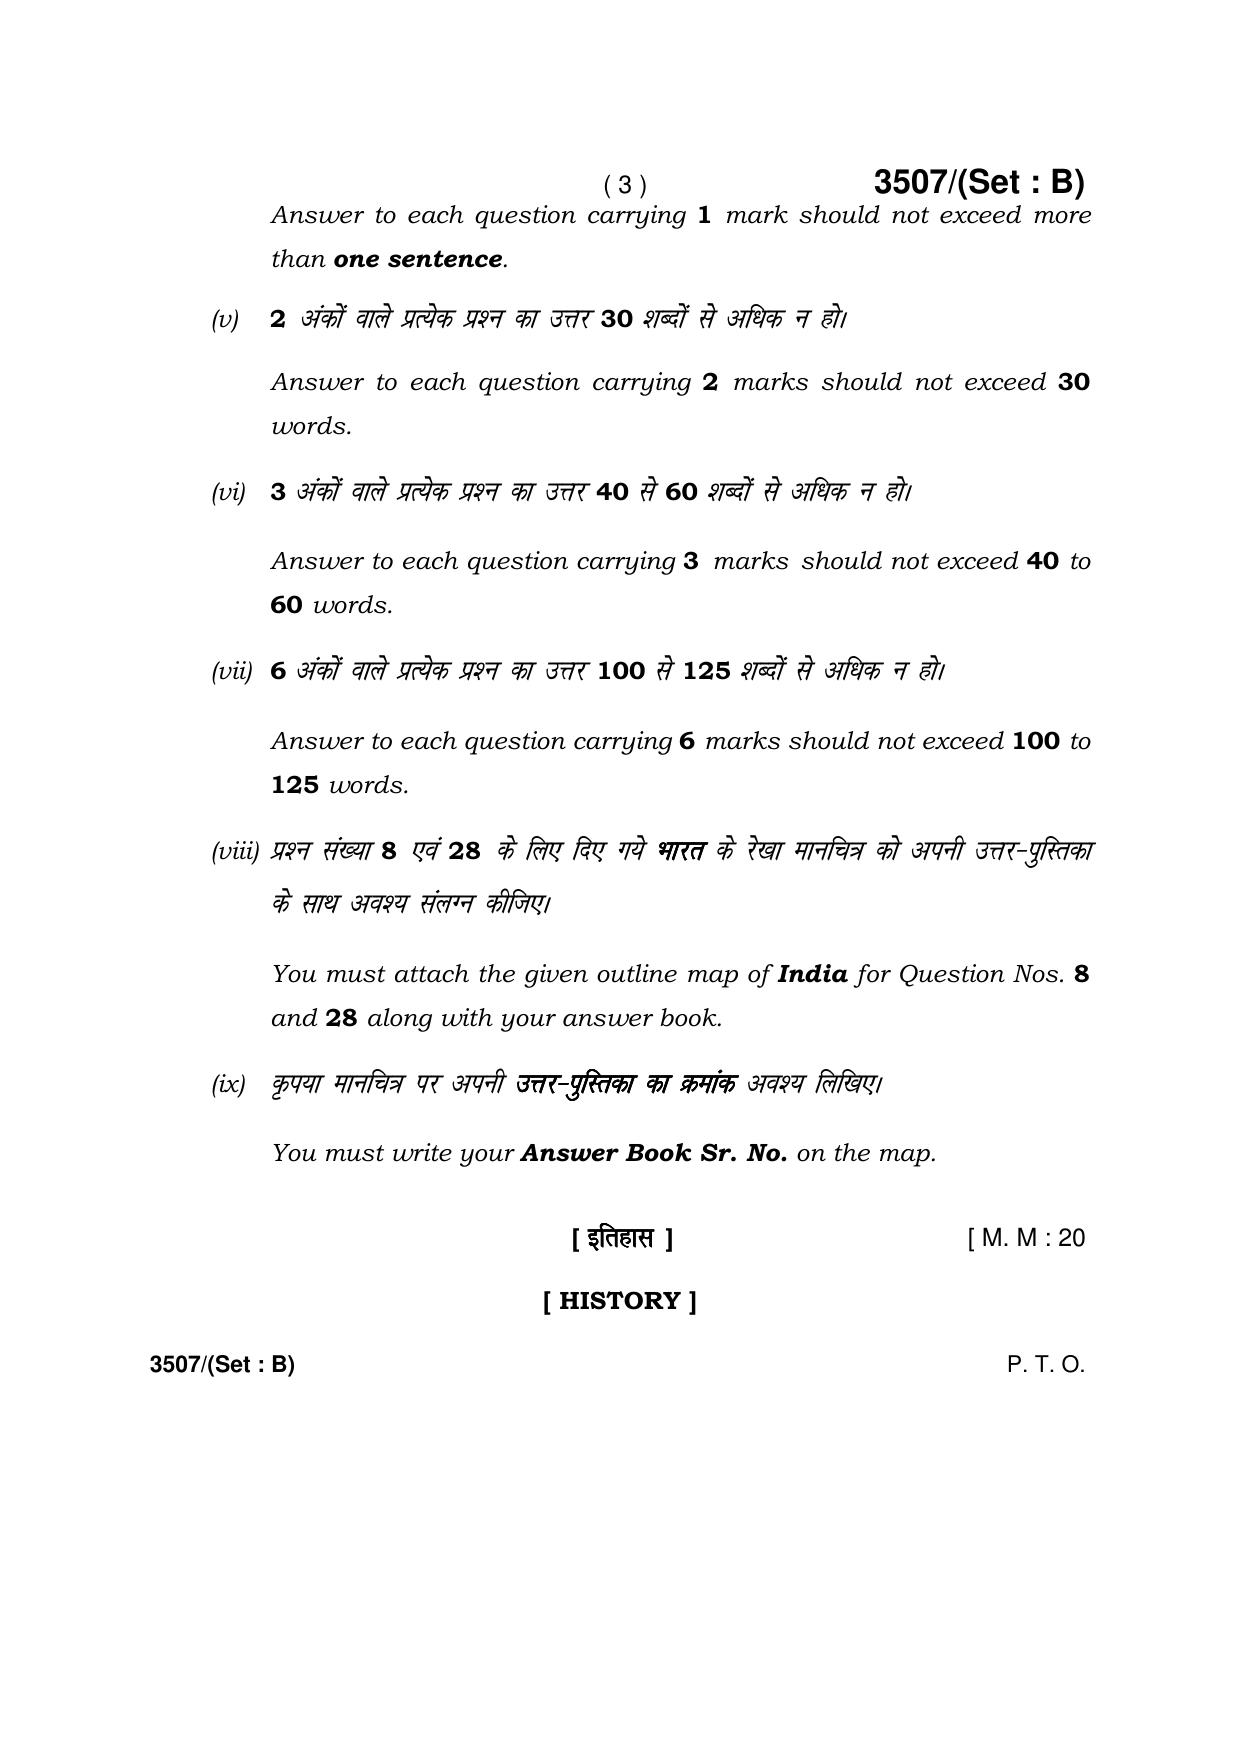 Haryana Board HBSE Class 10 Social Science -B 2018 Question Paper - Page 3